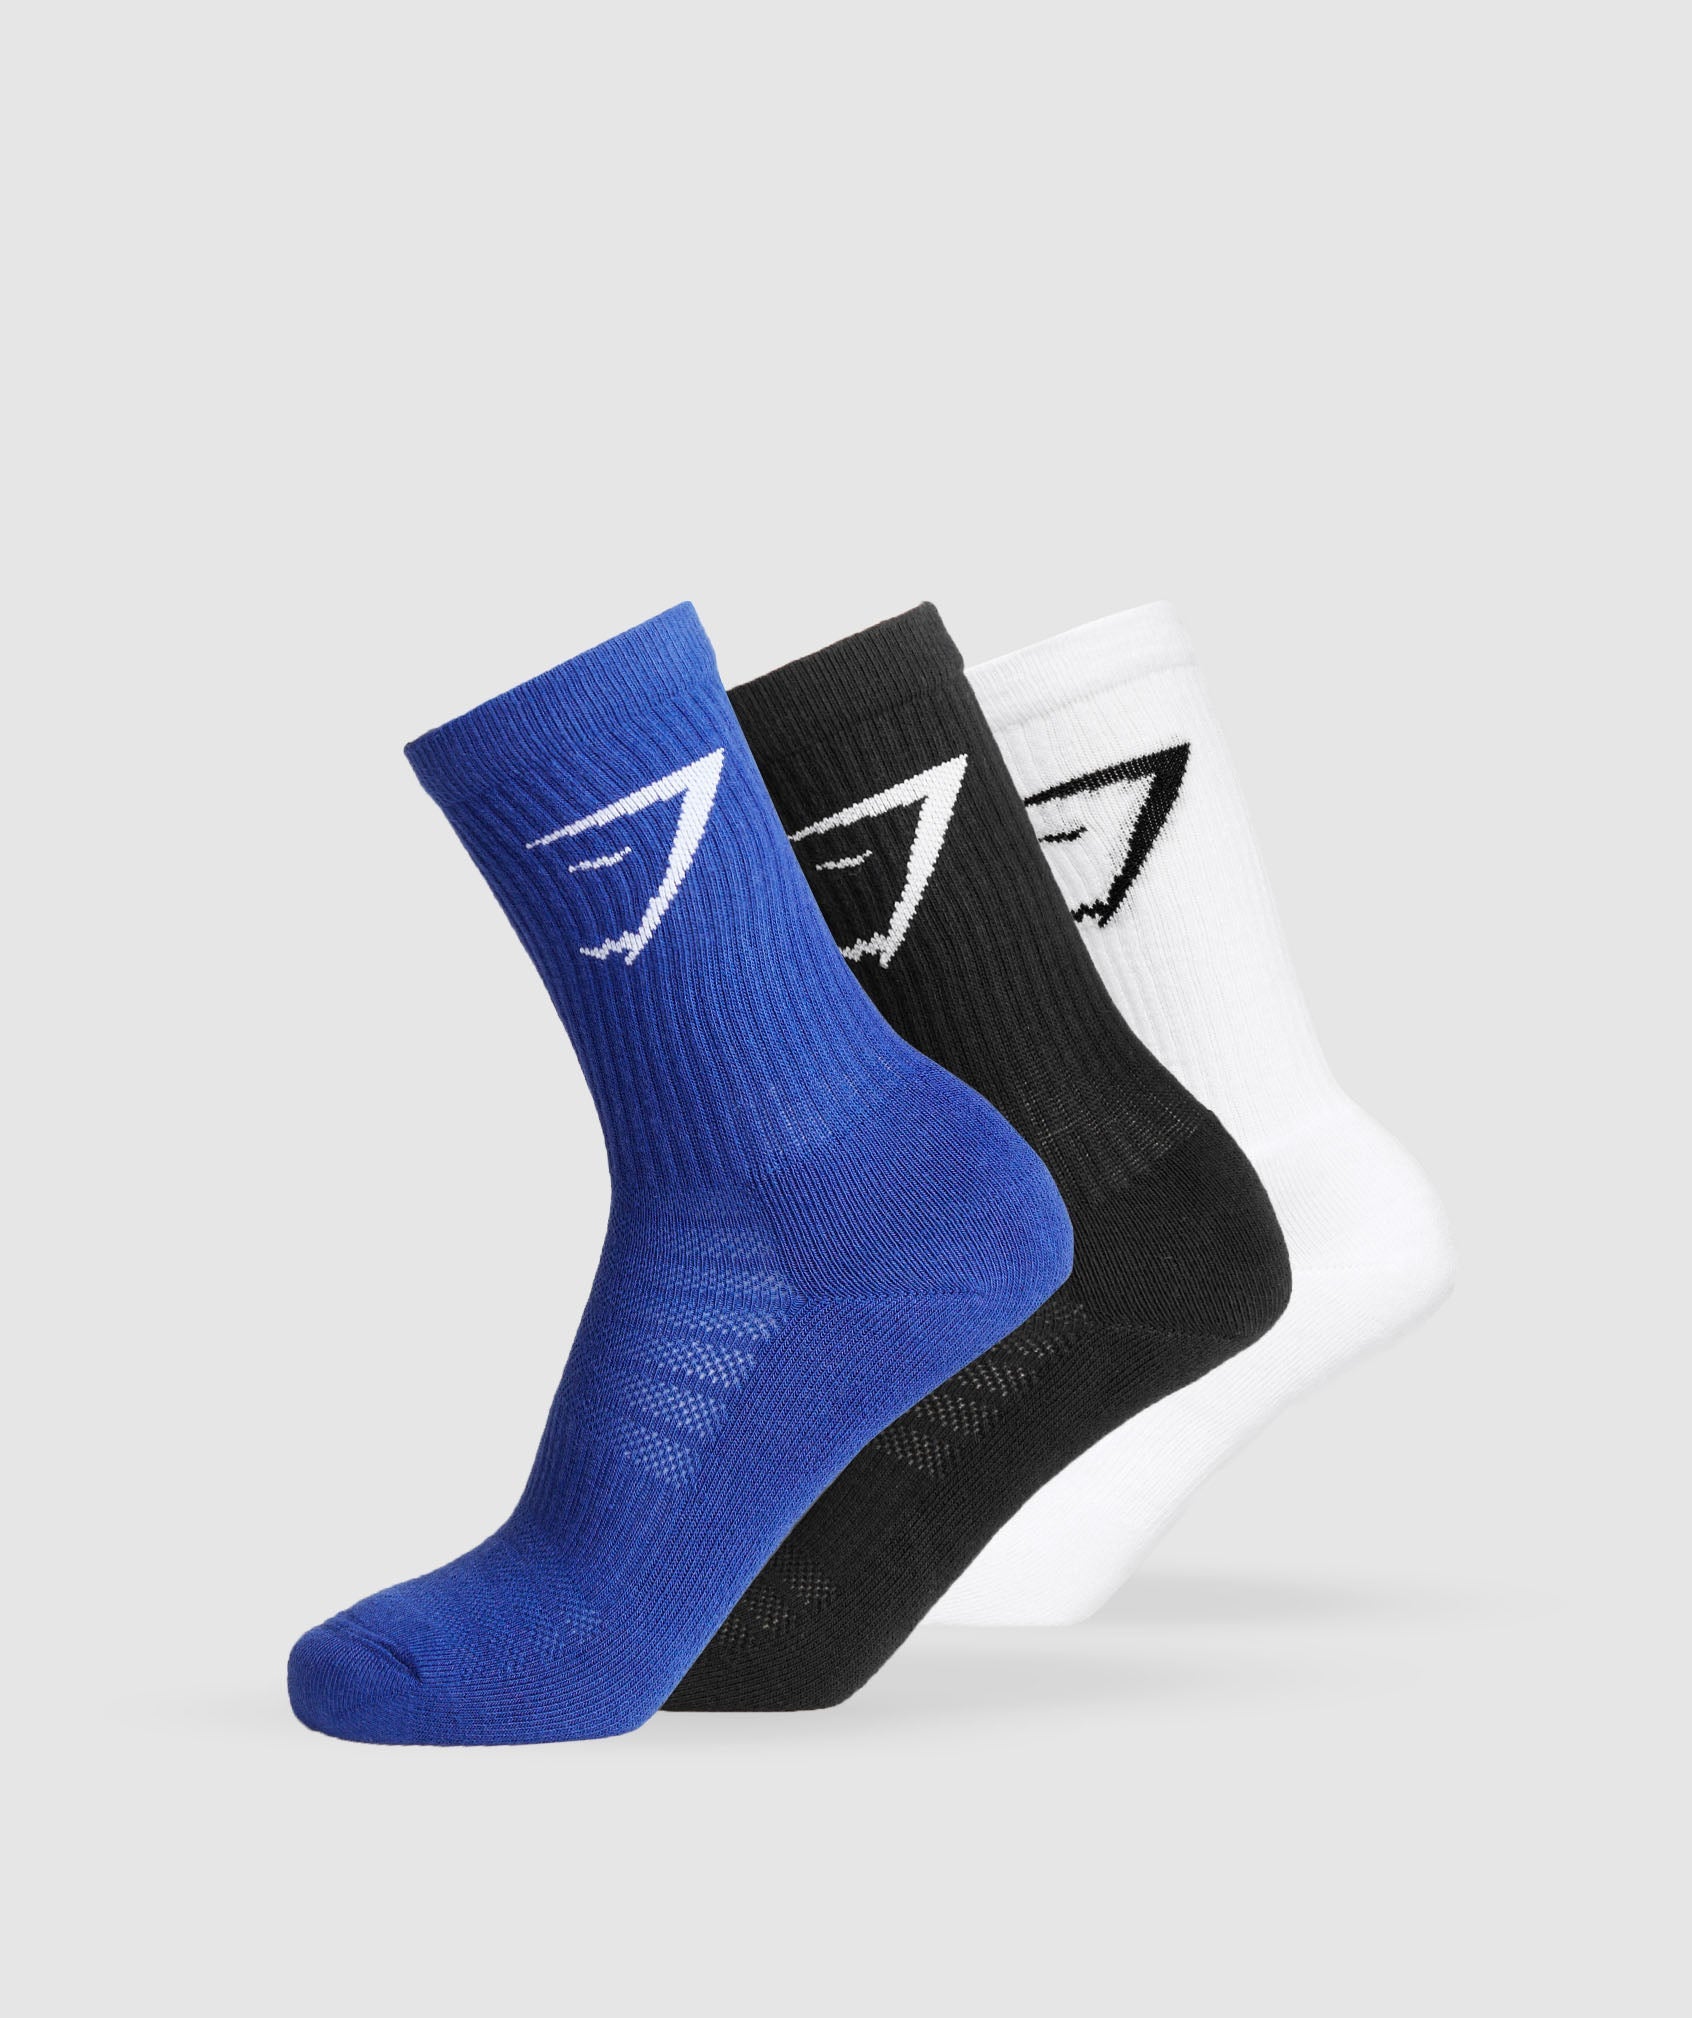 Crew Socks 3pk in White/Wave Blue/Black is out of stock